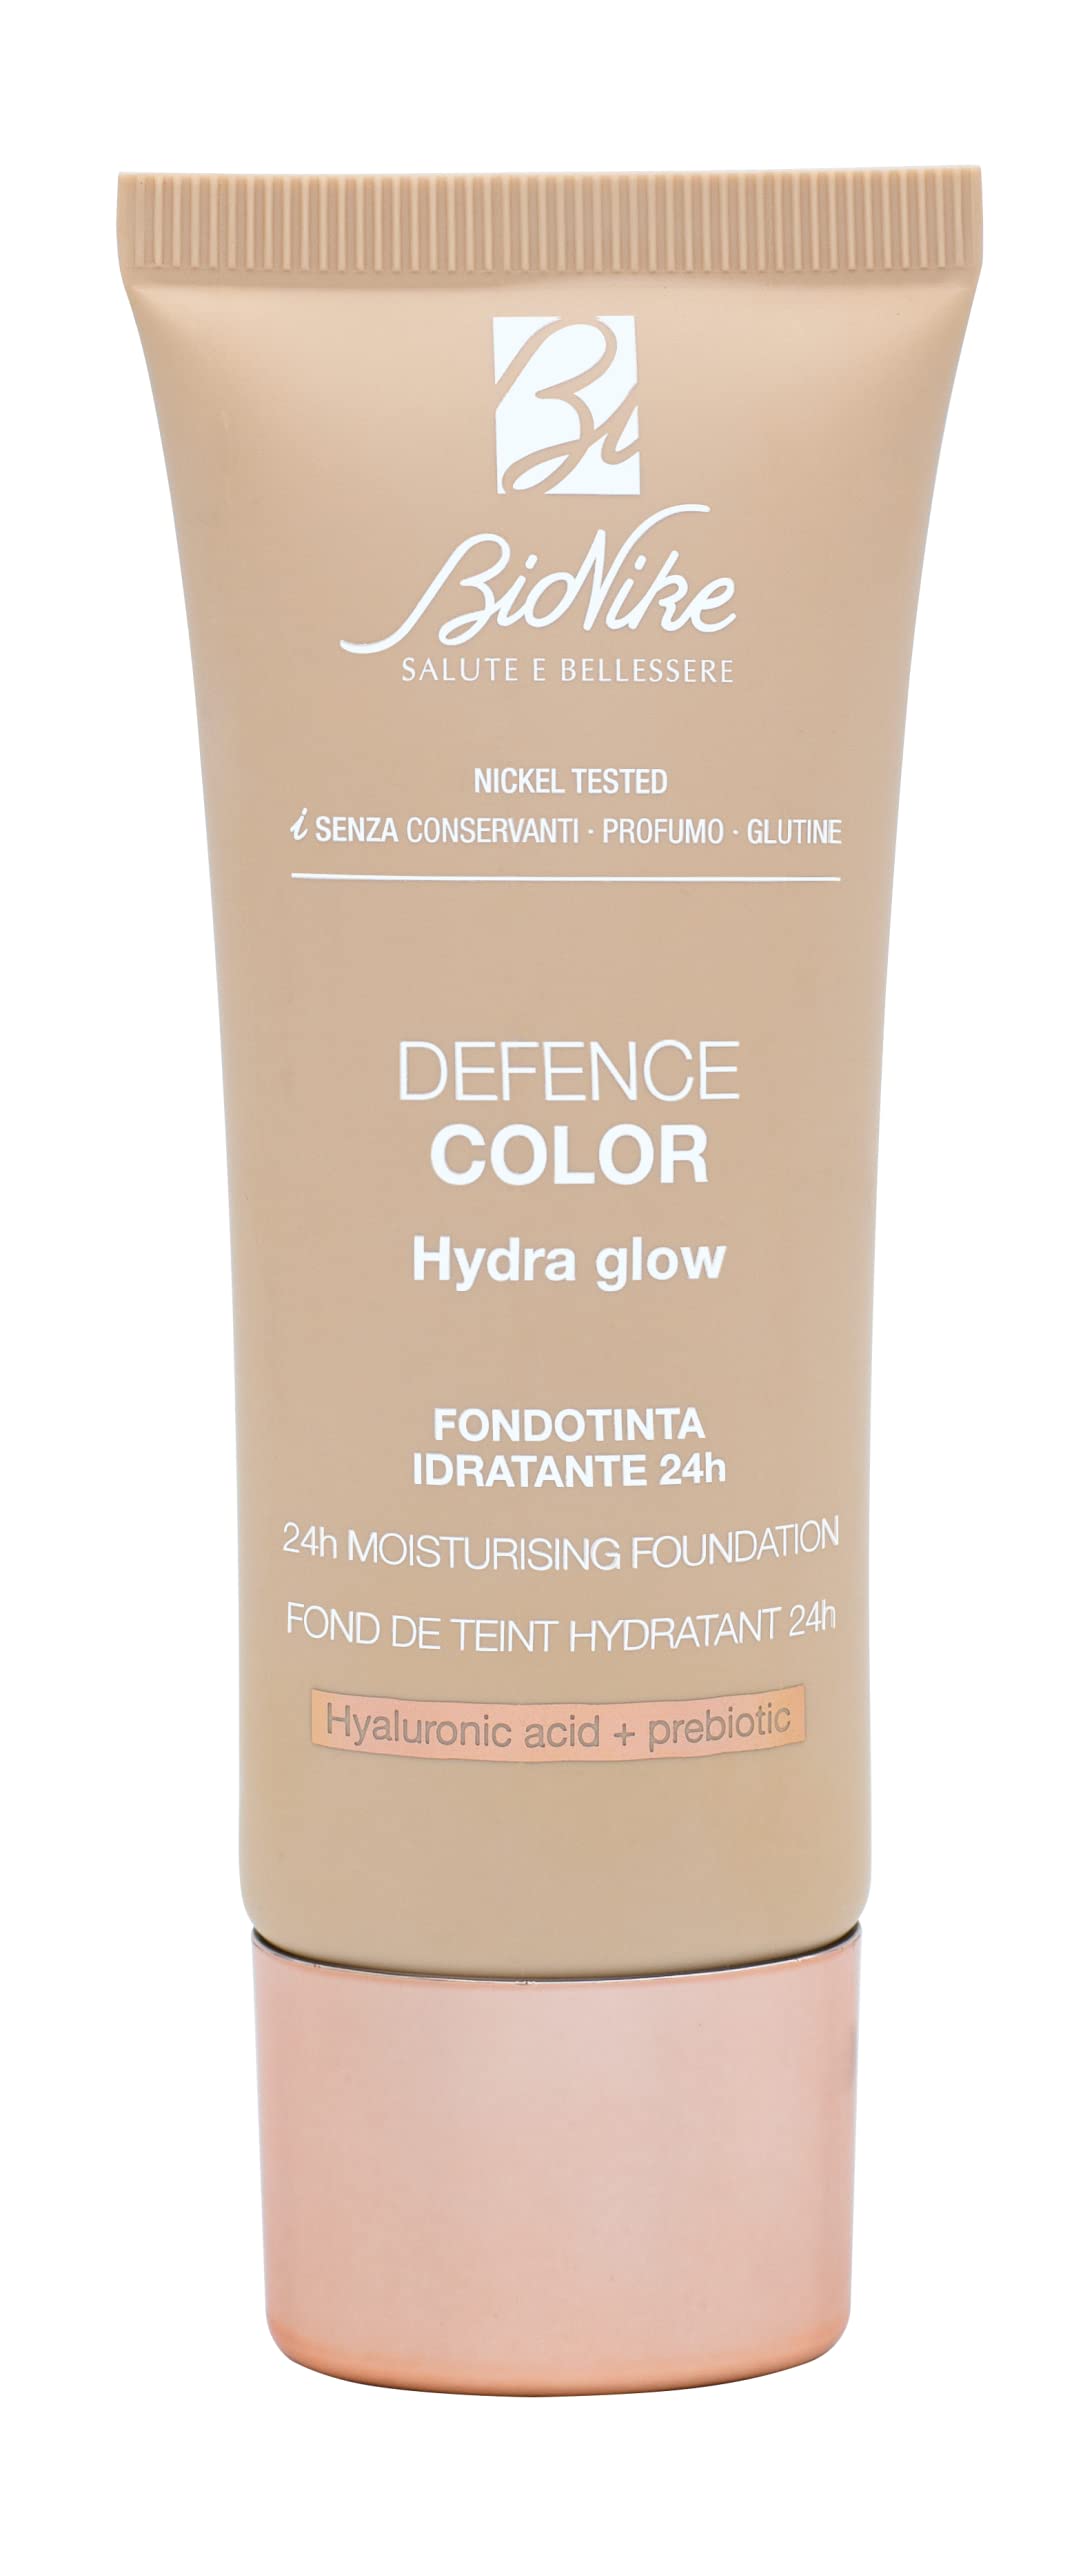 BioNike Defence Color Foundation Hydra Glow Feuchtigkeitsspendend 24h 30ml - 102 Cremes